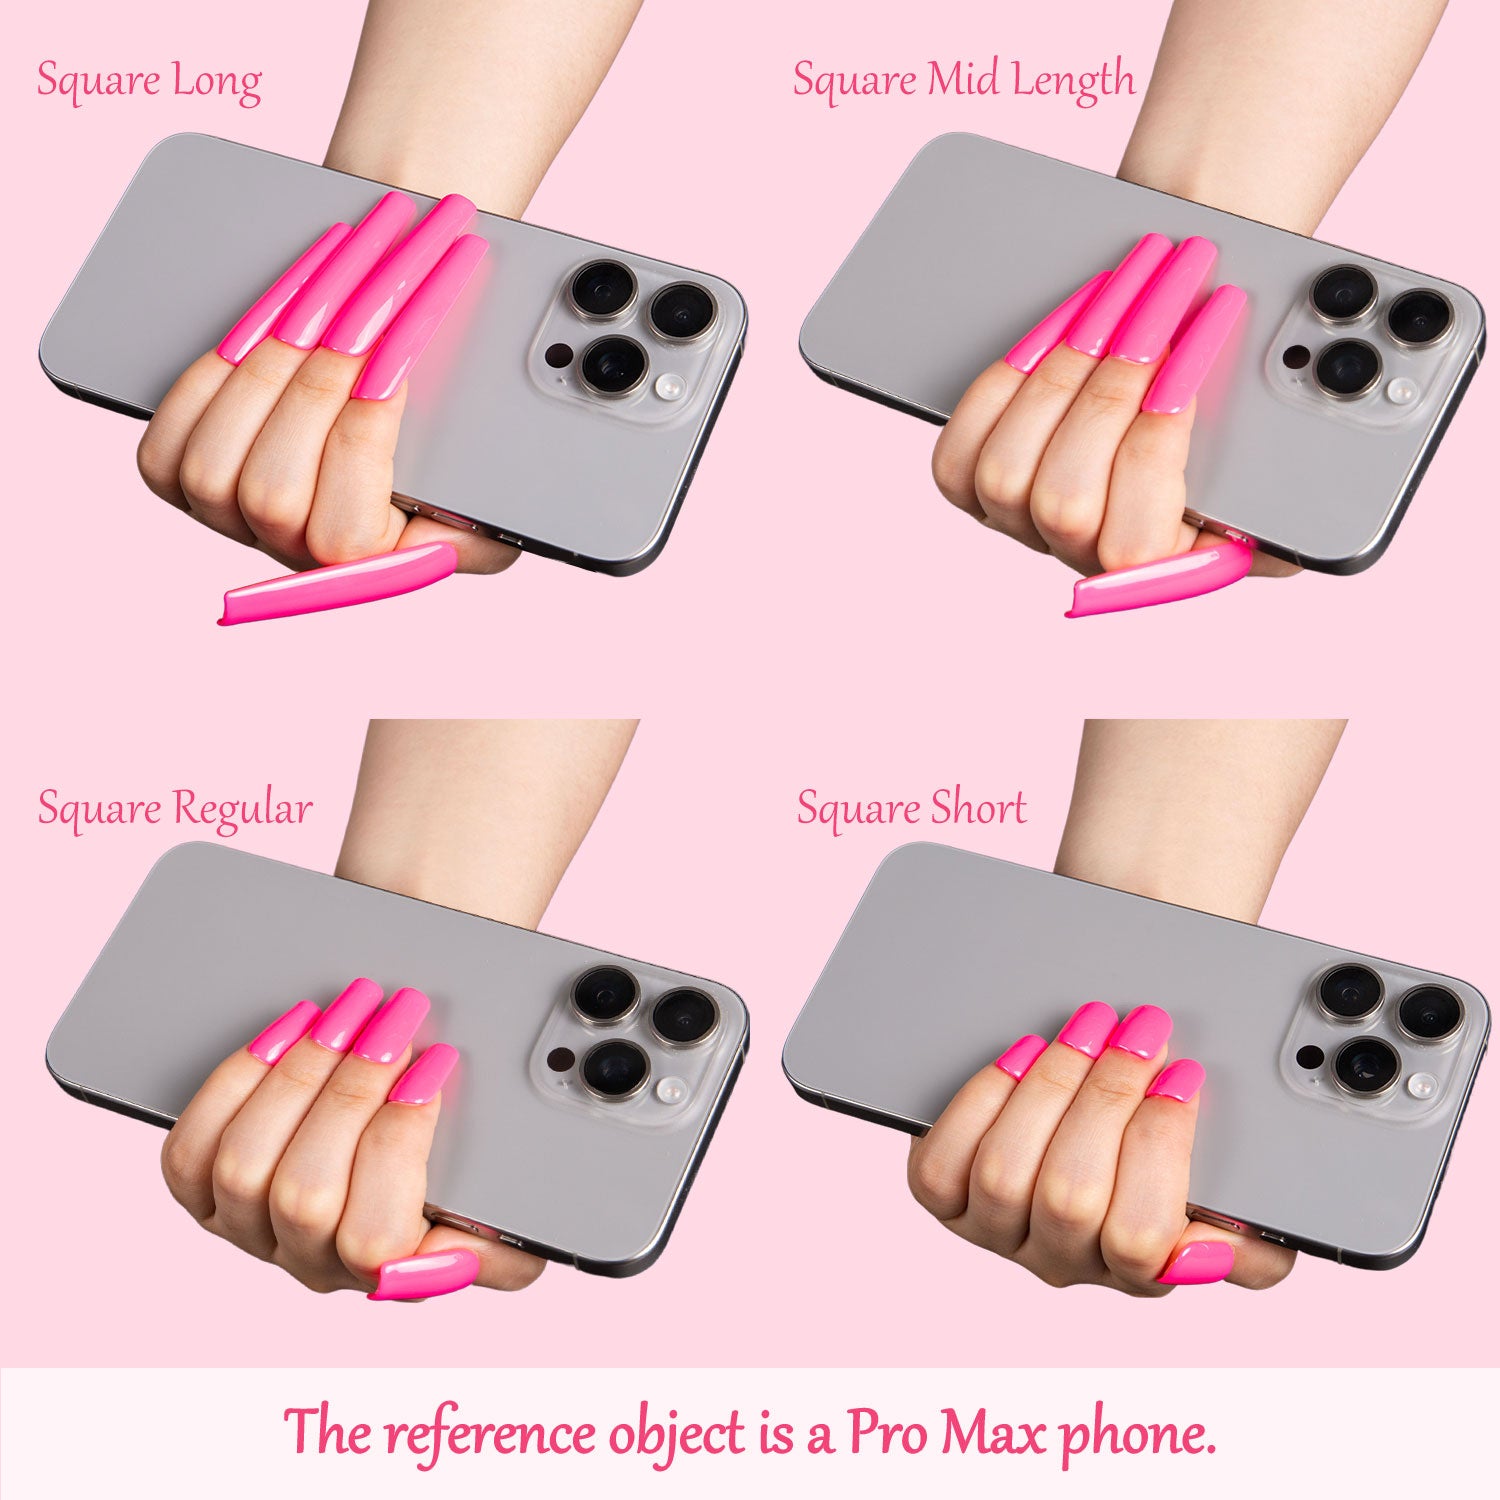 Four hands holding a Pro Max phone showcasing Lovful.com’s pink square press-on nails in different lengths: Square Long, Square Mid Length, Square Regular, and Square Short.